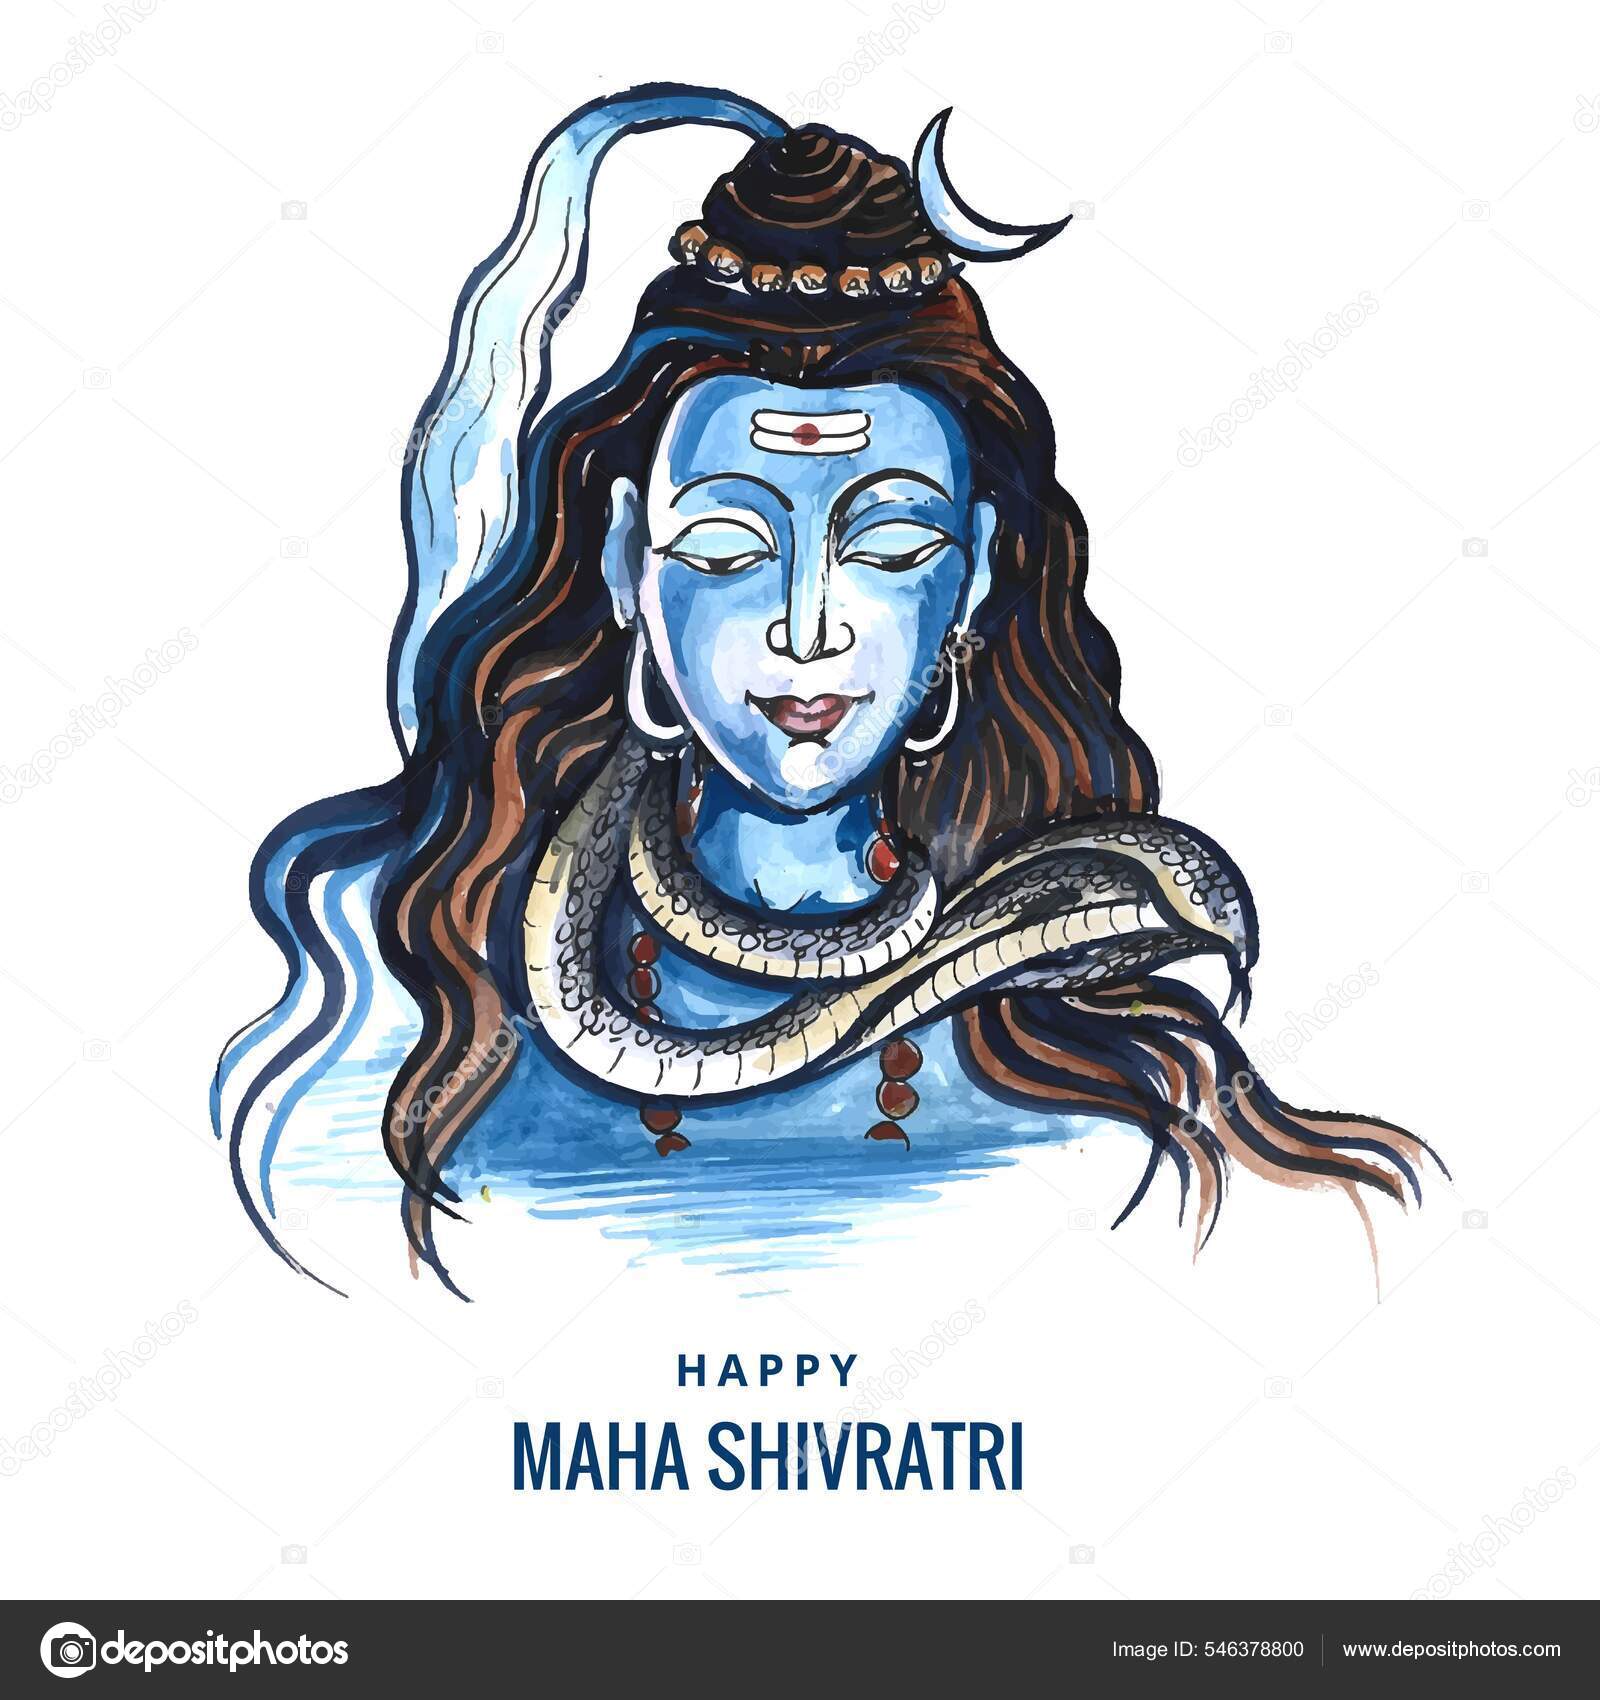 Share 104+ shiv ratri drawing best